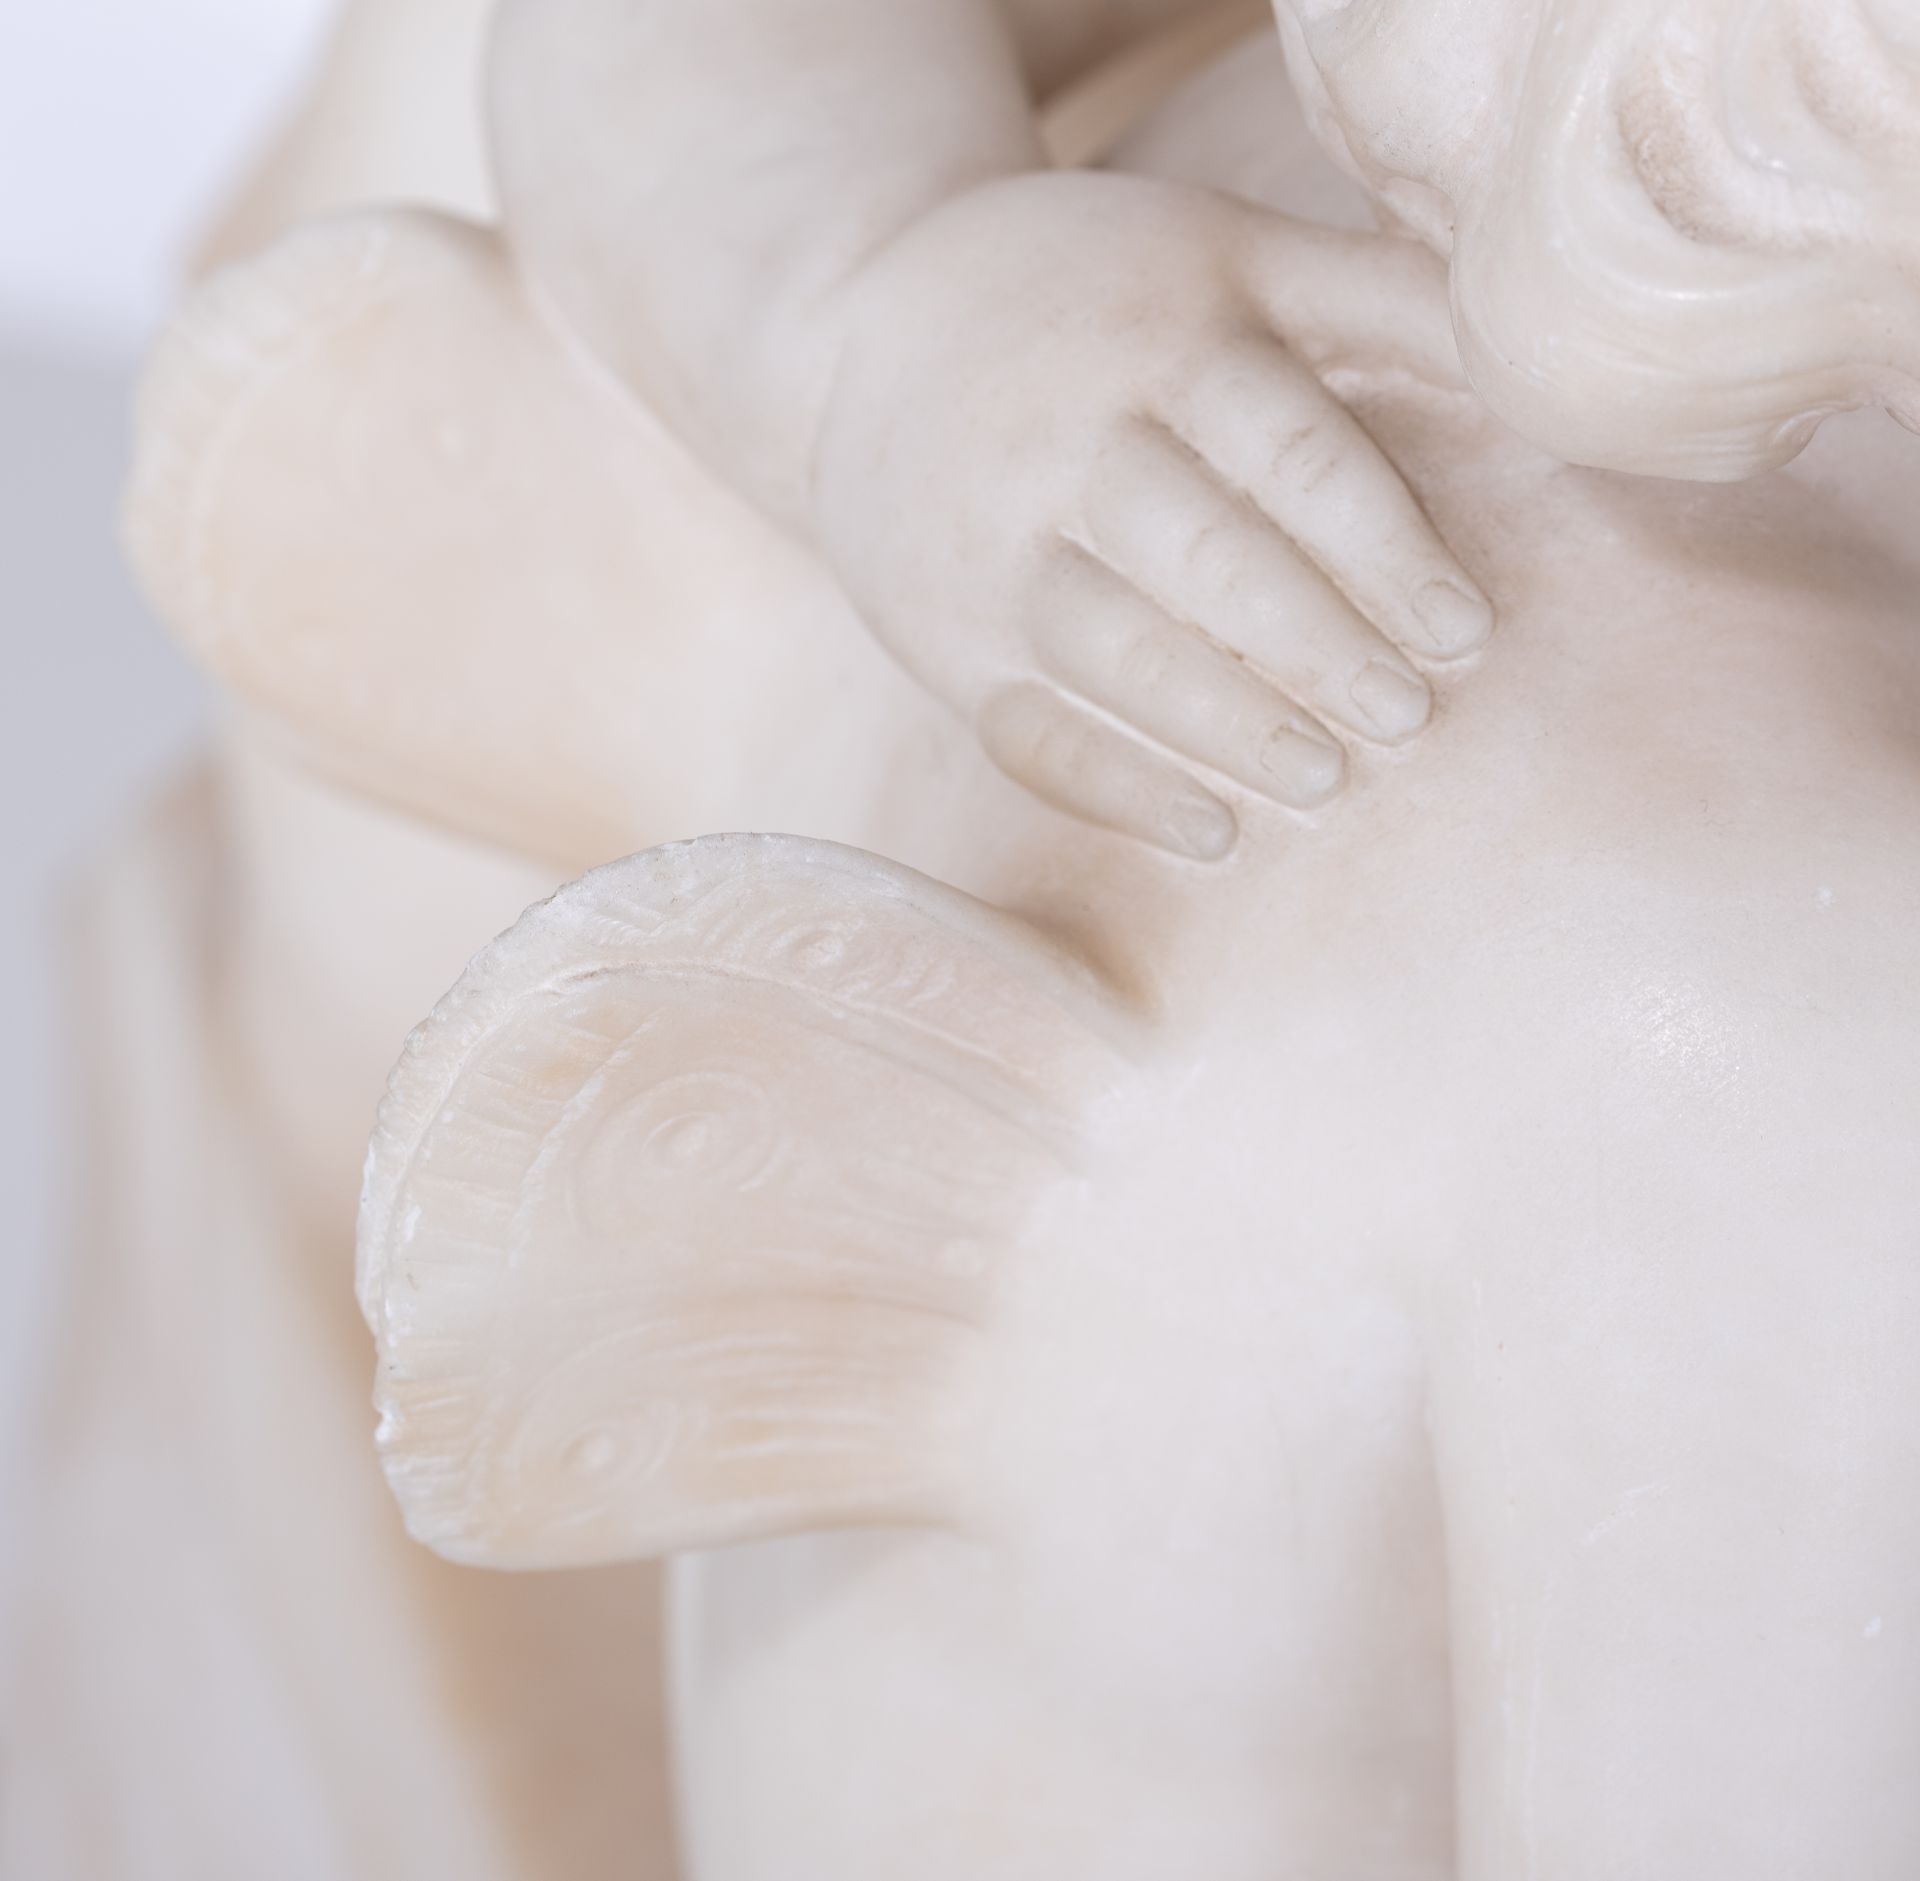 Pugi G., a Carrara marble group, depicting Amor and Psyche as children, H 45,5 cm - Image 10 of 11